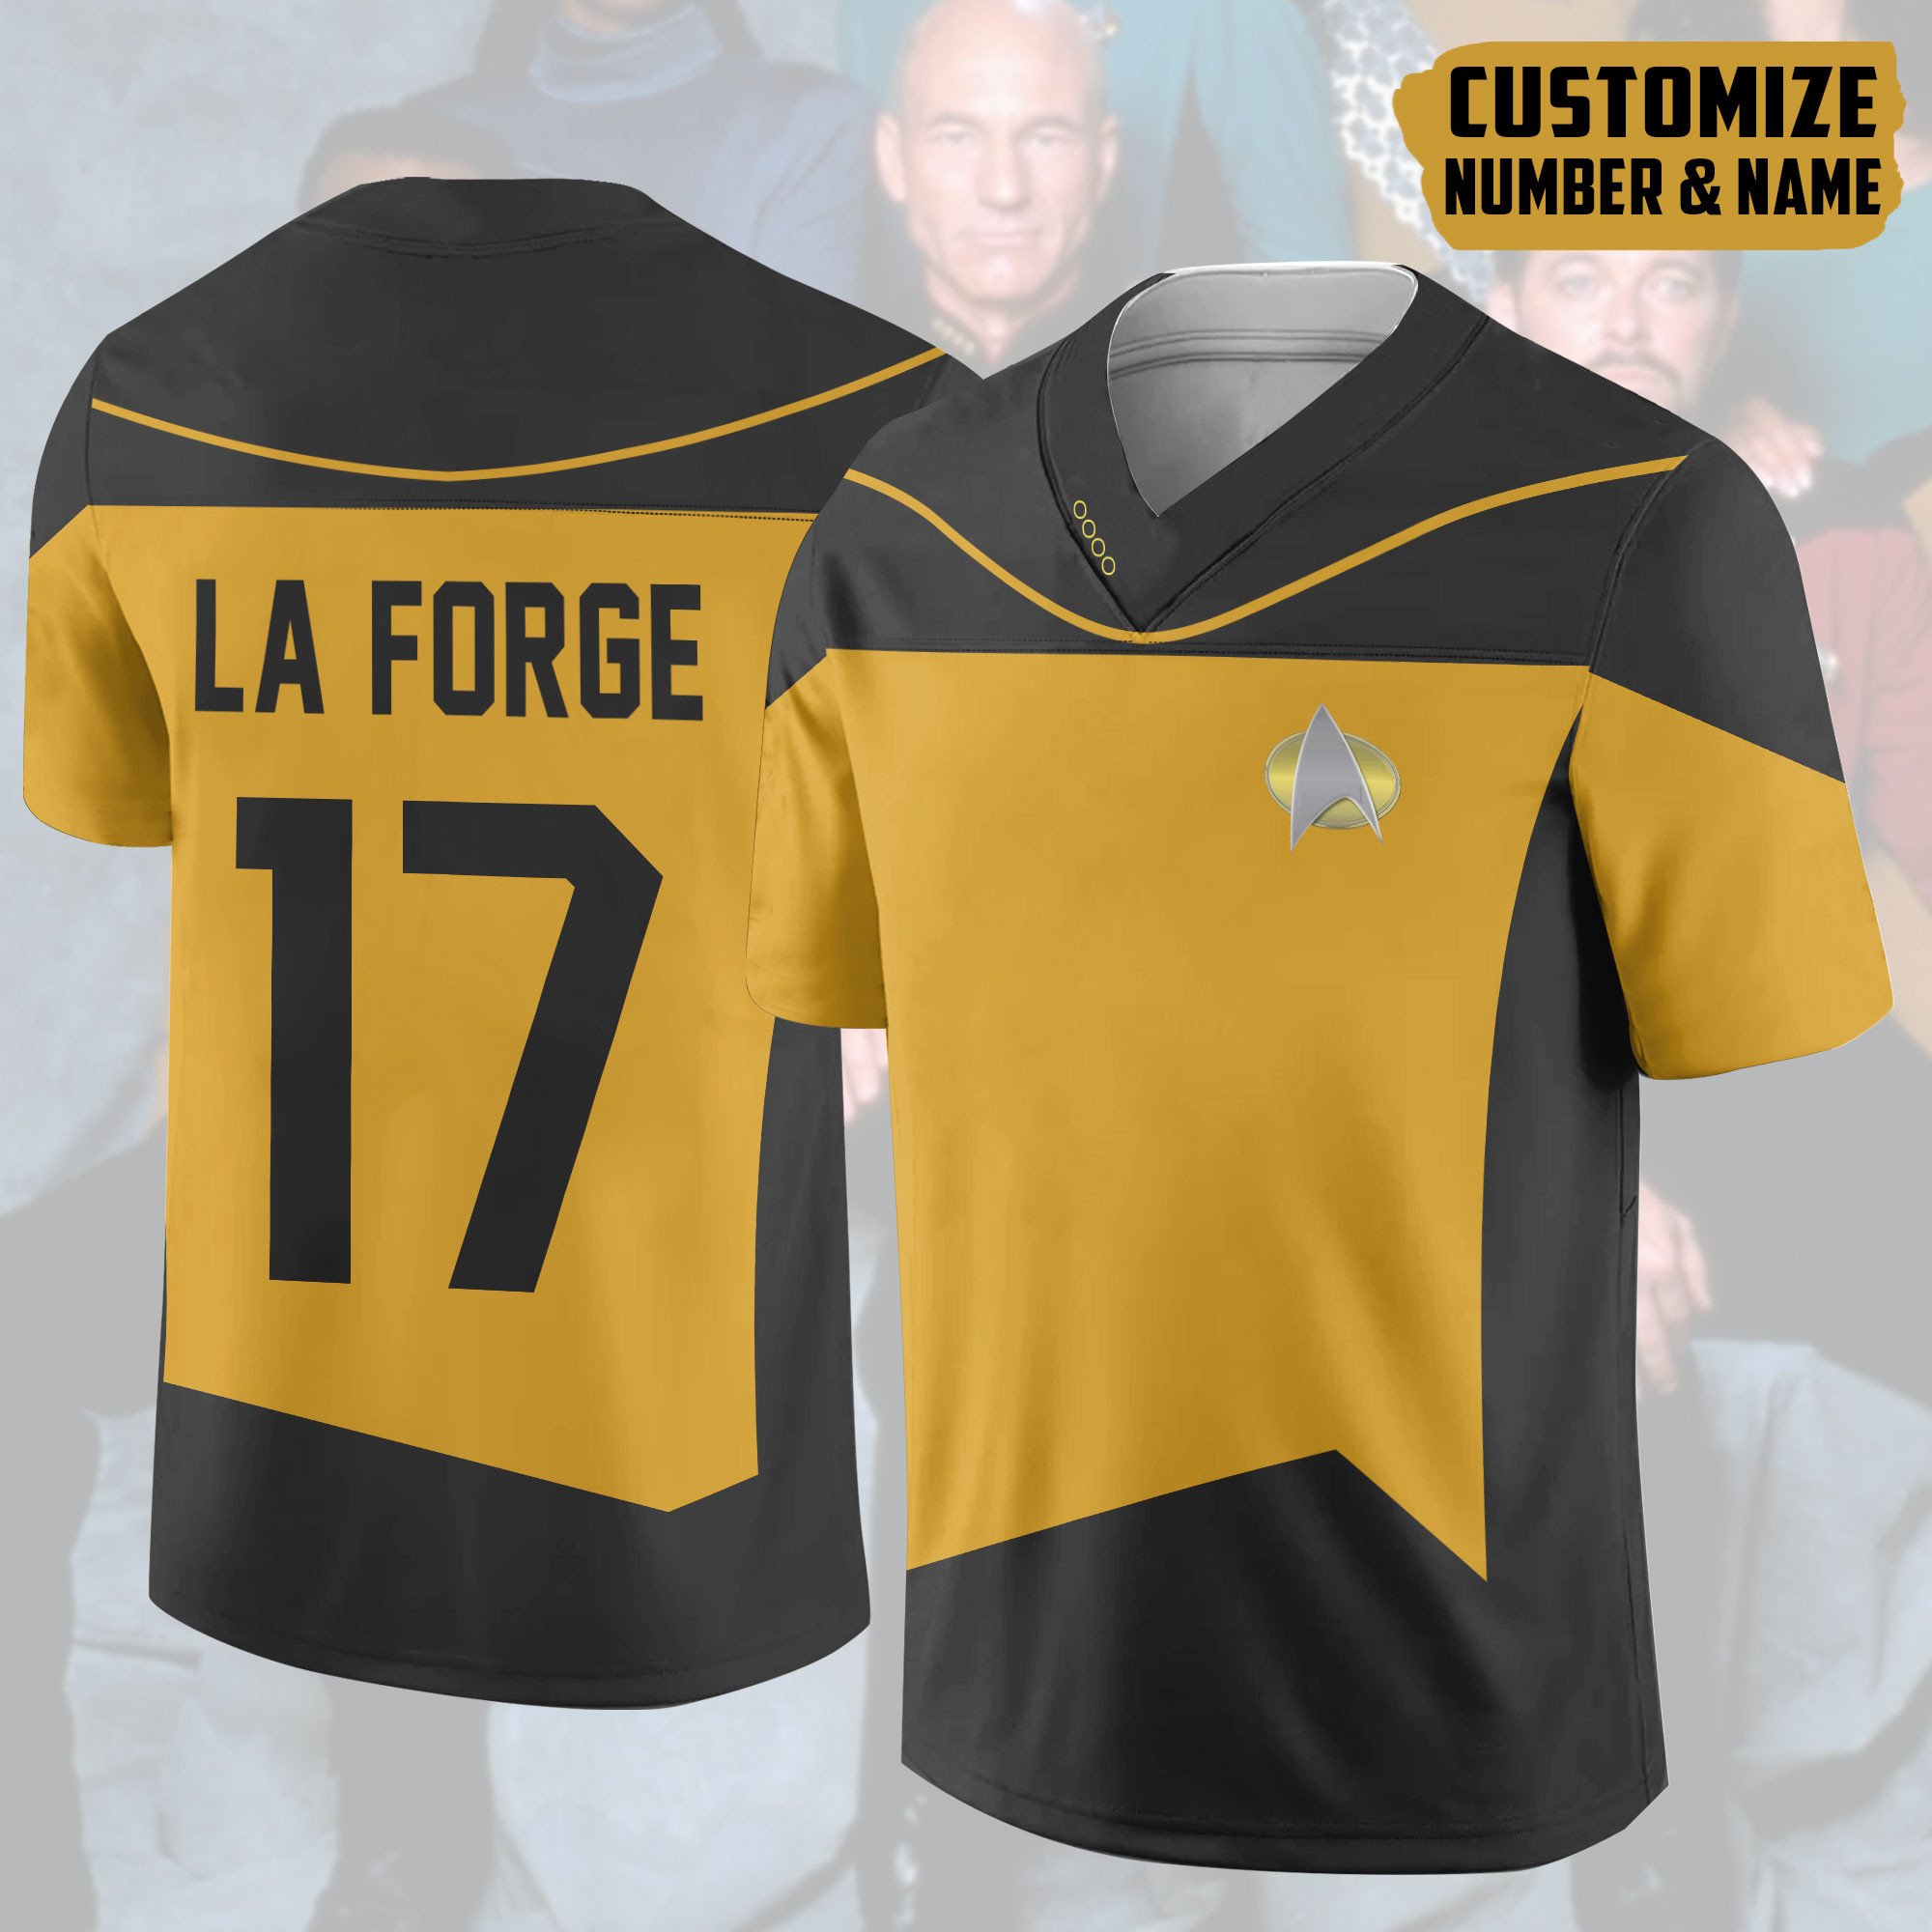 TOP S.T The Next Generation Yellow Version Personalized Custom Football All Over Print Jersey 4